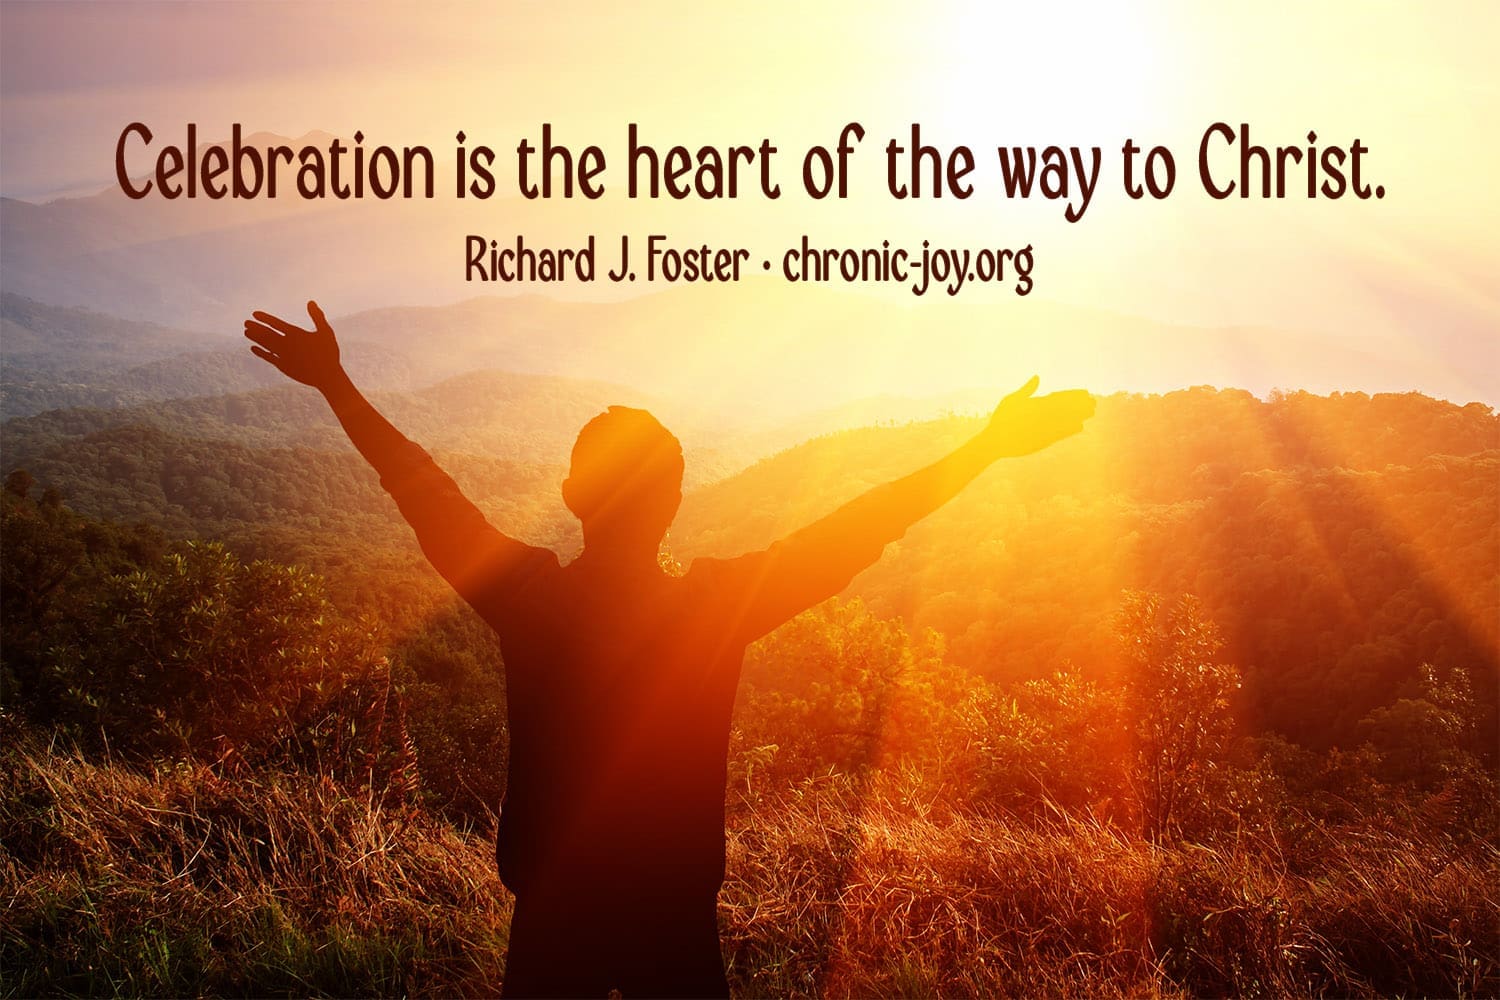 Celebration is the heart of the way to Christ.